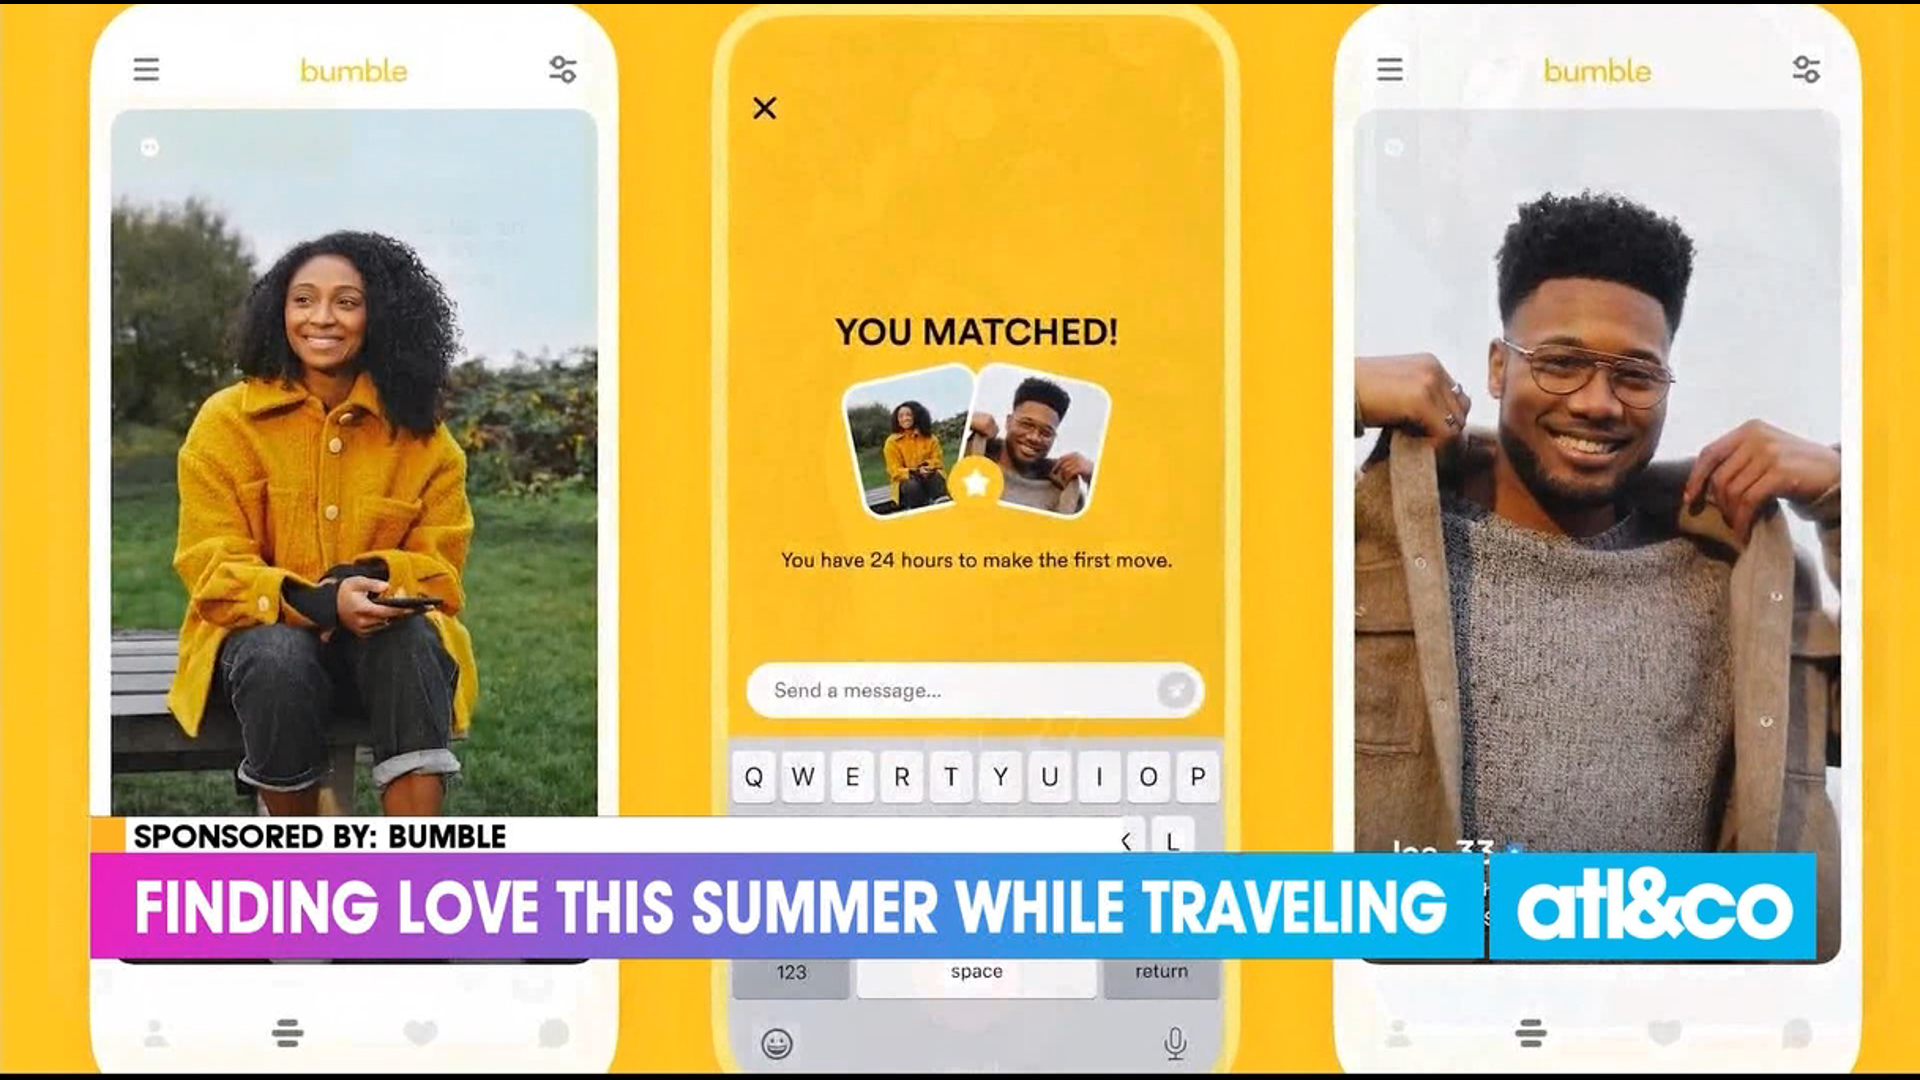 More than 1/3 of Americans say they're open to exploring a relationship with someone who lives in another city. Get summer dating tips from Bumble.